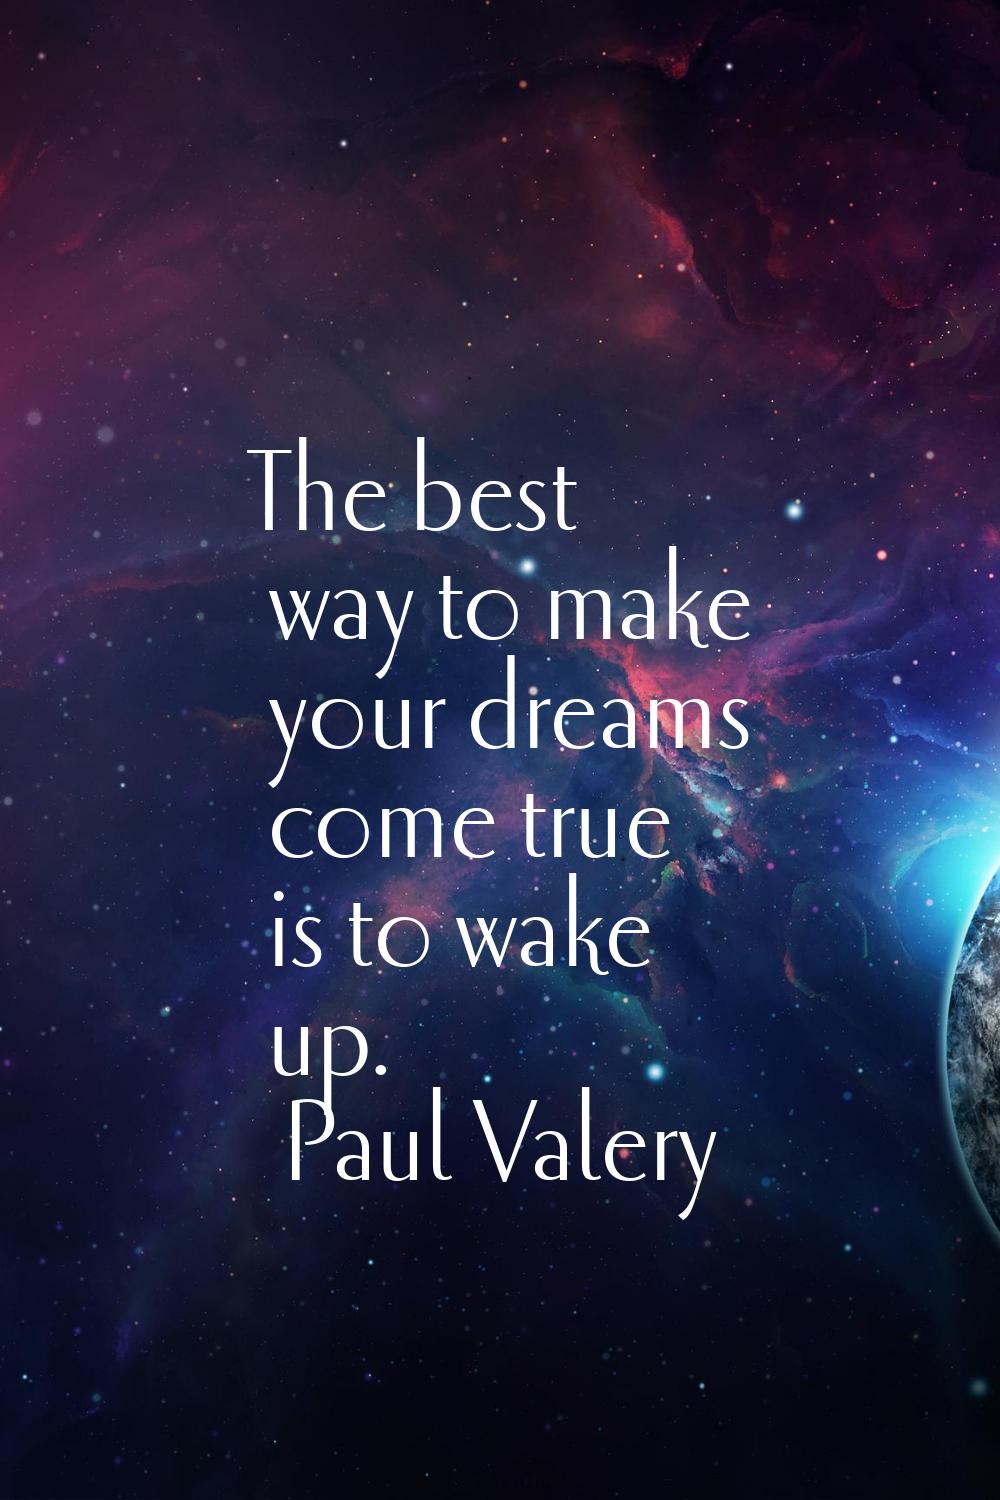 The best way to make your dreams come true is to wake up.